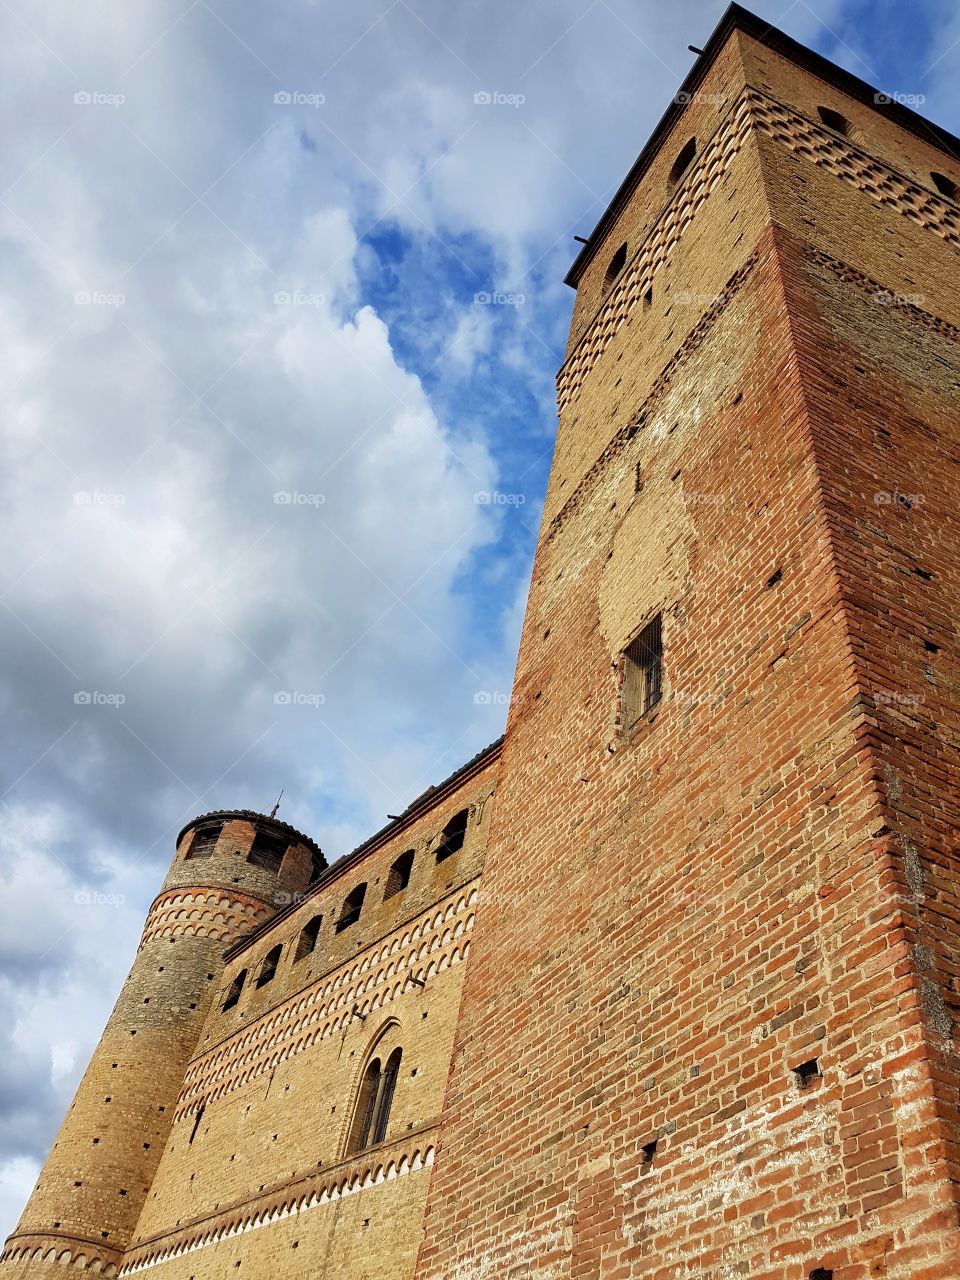 Medieval castle with towers in Piedmont, Italy